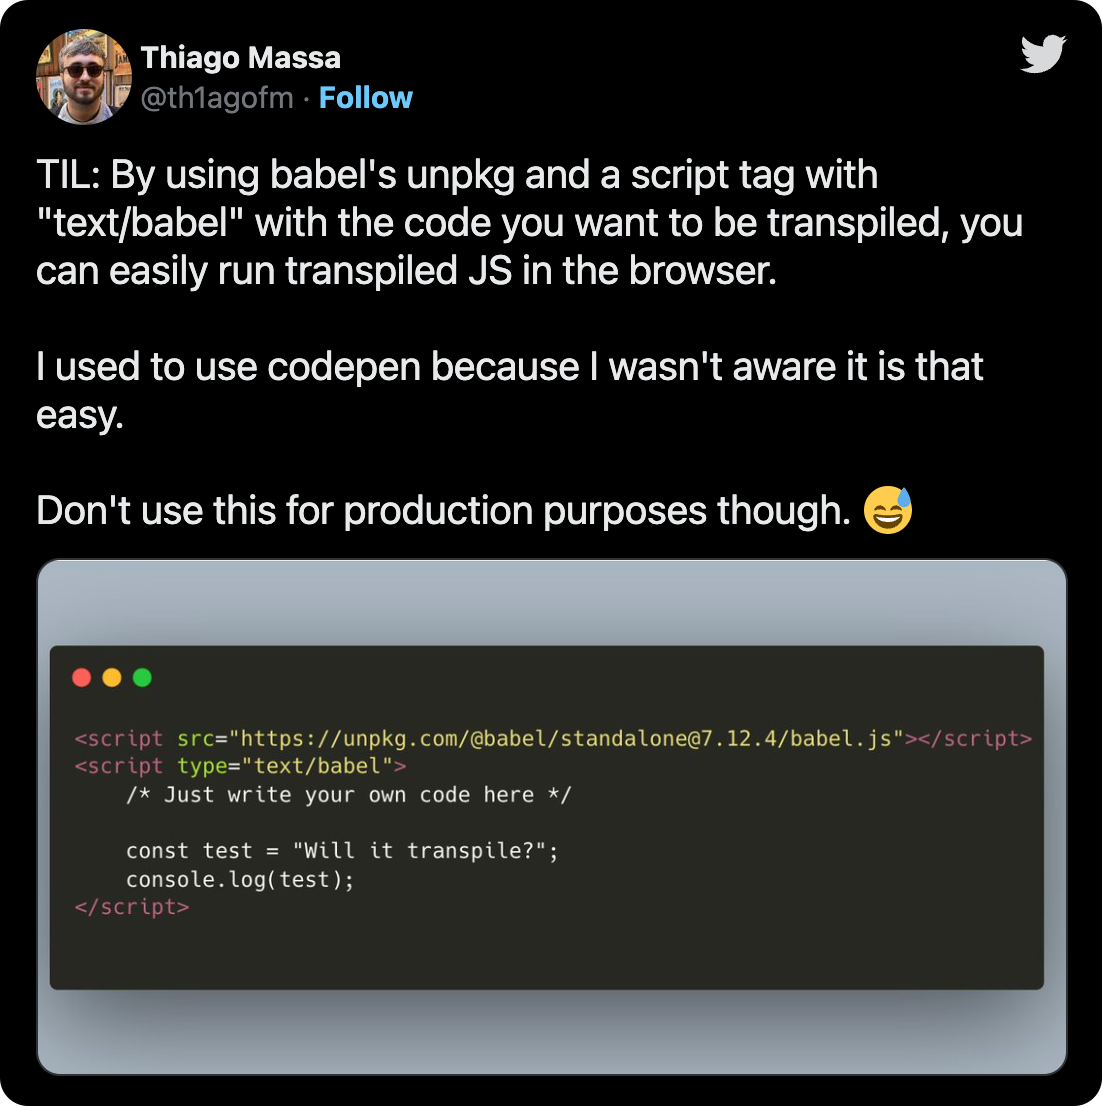 TIL: By using babel's unpkg and a script tag with "text/babel" with the code you want to be transpiled, you can easily run transpiled JS in the browser. I used to use codepen because I wasn't aware it is that easy. Don't use this for production purposes though.